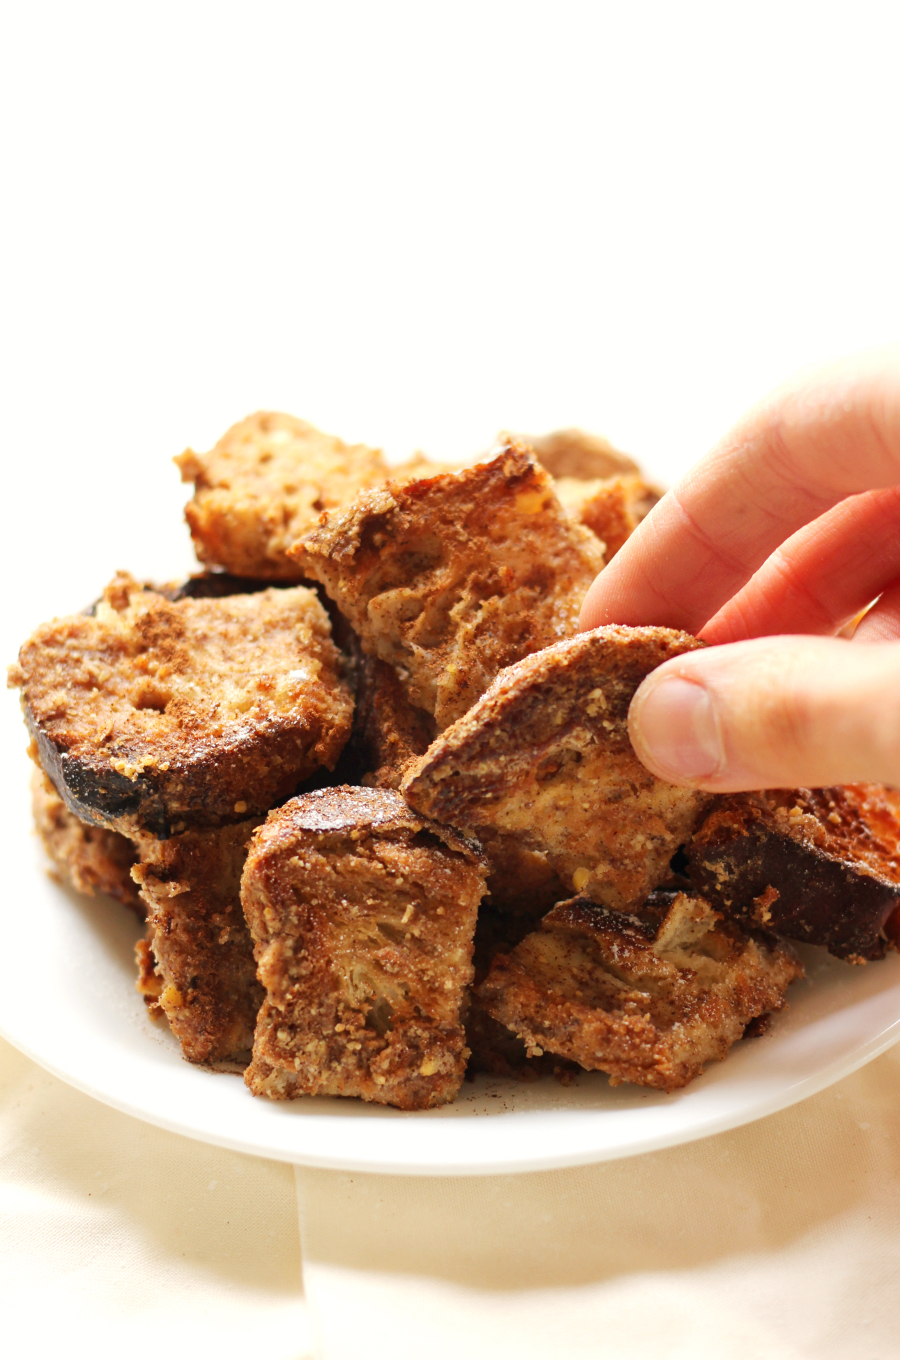 Gluten-Free Cinnamon French Toast Bites (Allergy-Free, Vegan) | Strength and Sunshine @RebeccaGF666 Breakfast just got even more fun! Gluten-Free Cinnamon French Toast Bites that are allergy-free, vegan, and perfect for little hands! An easy recipe perfect for a healthy weekend treat! Kid-loved and mom-approved!